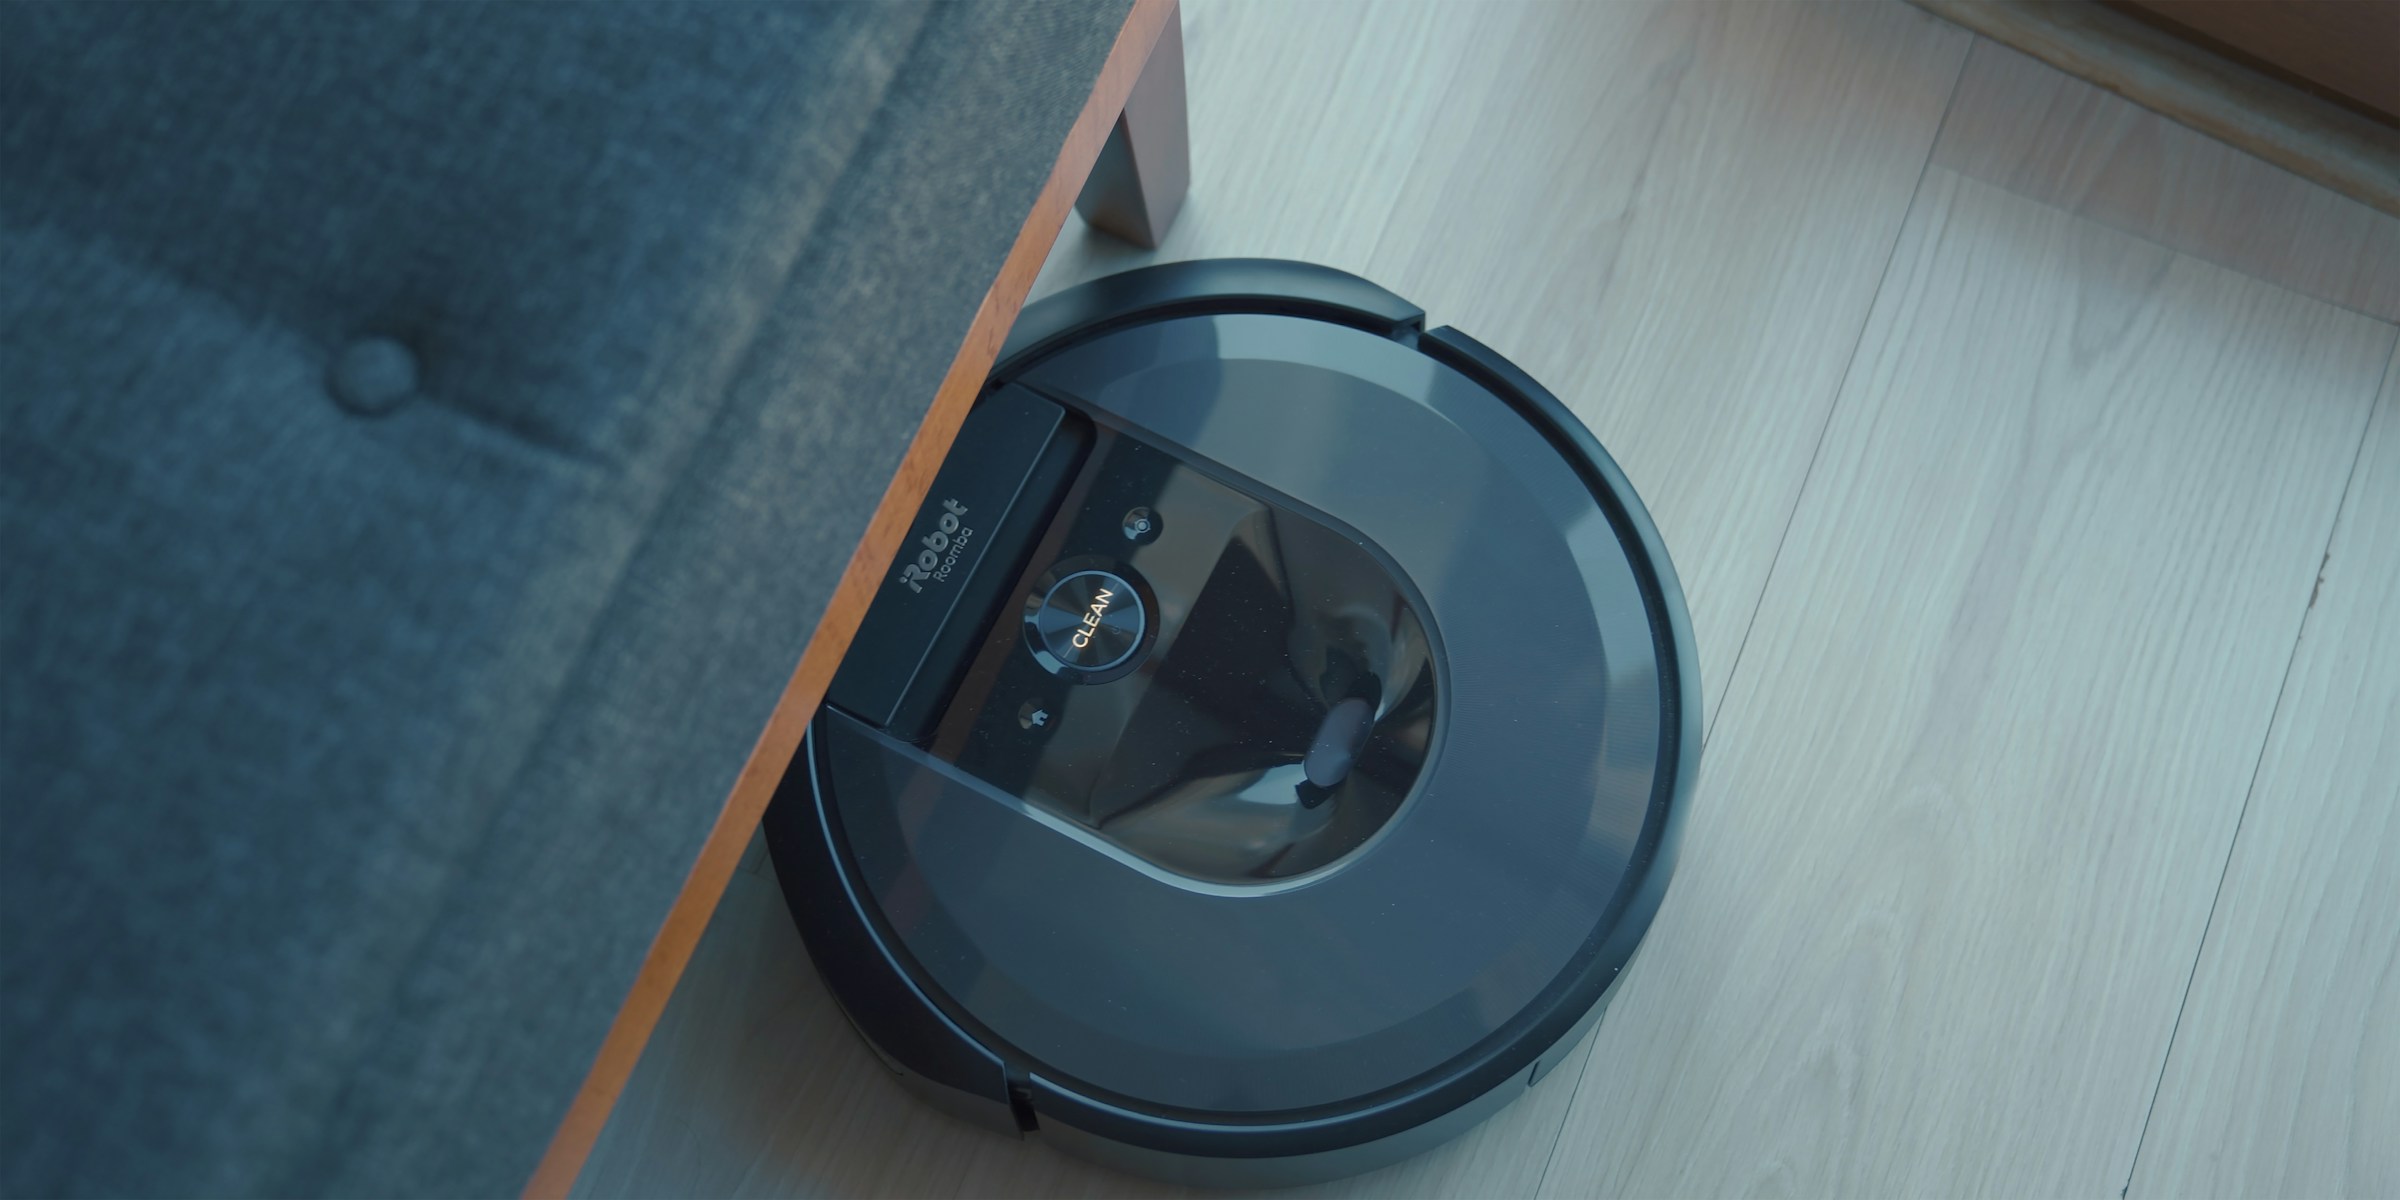 A futuristic robotic vacuum cleaner efficiently cleans the floor of a room, showcasing the benefits of smart appliances in enhancing home efficiency.